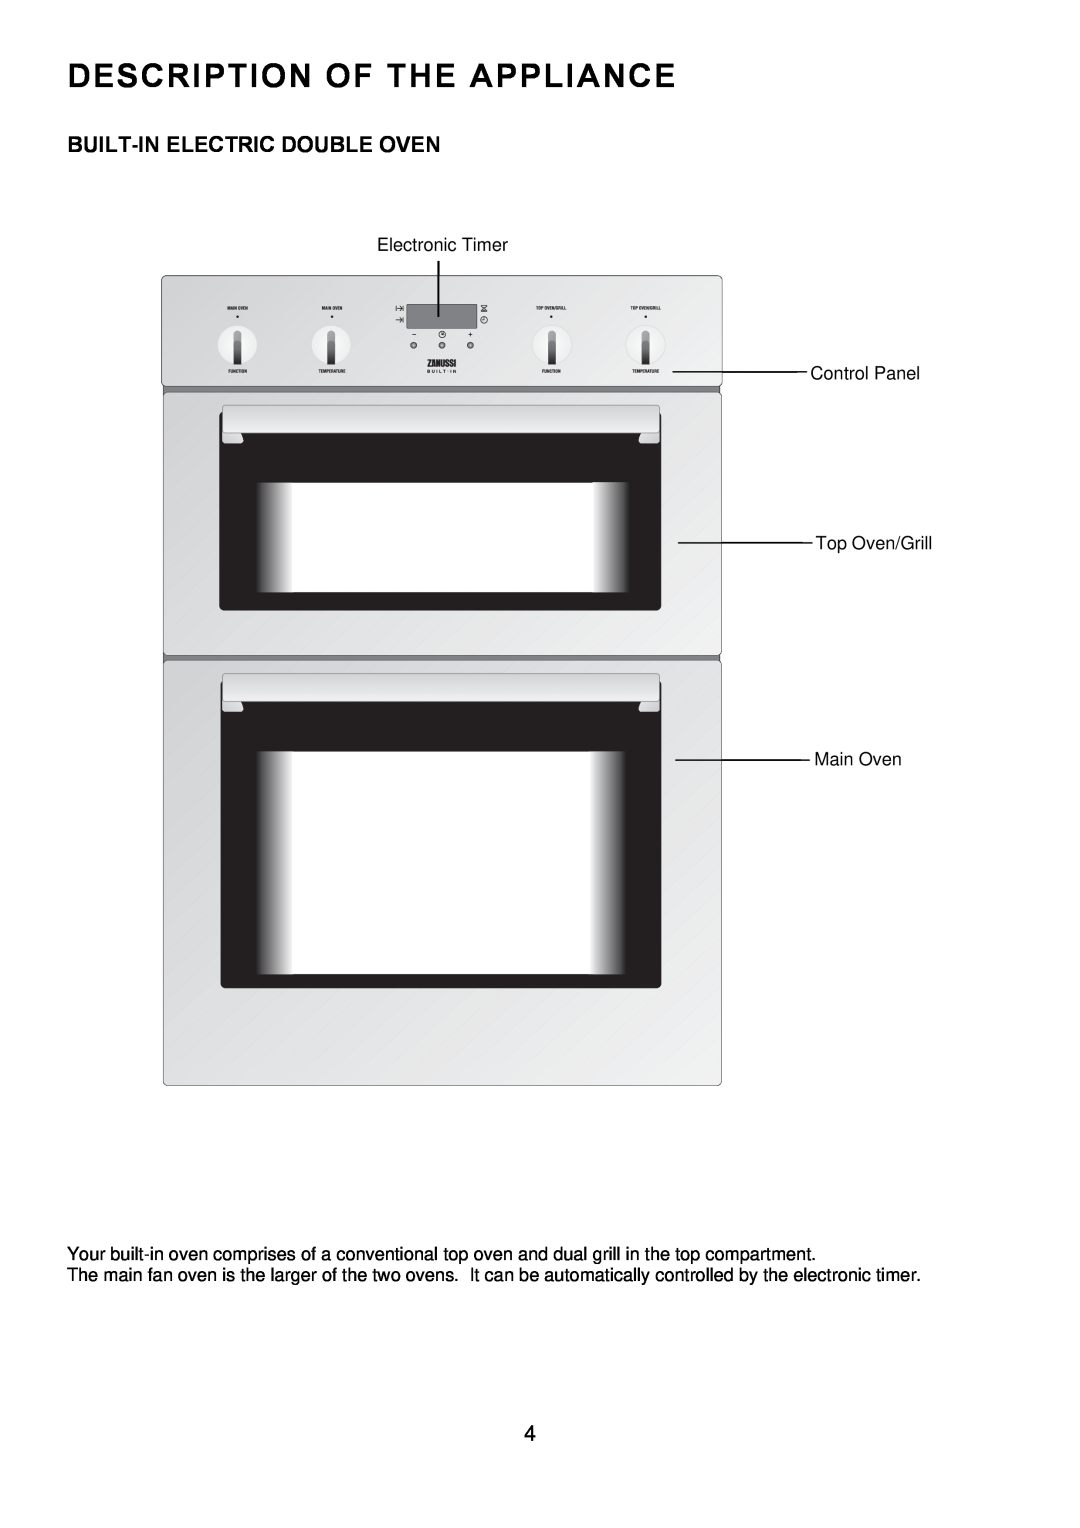 Zanussi ZDF 290 manual Description Of The Appliance, Built-In Electric Double Oven 